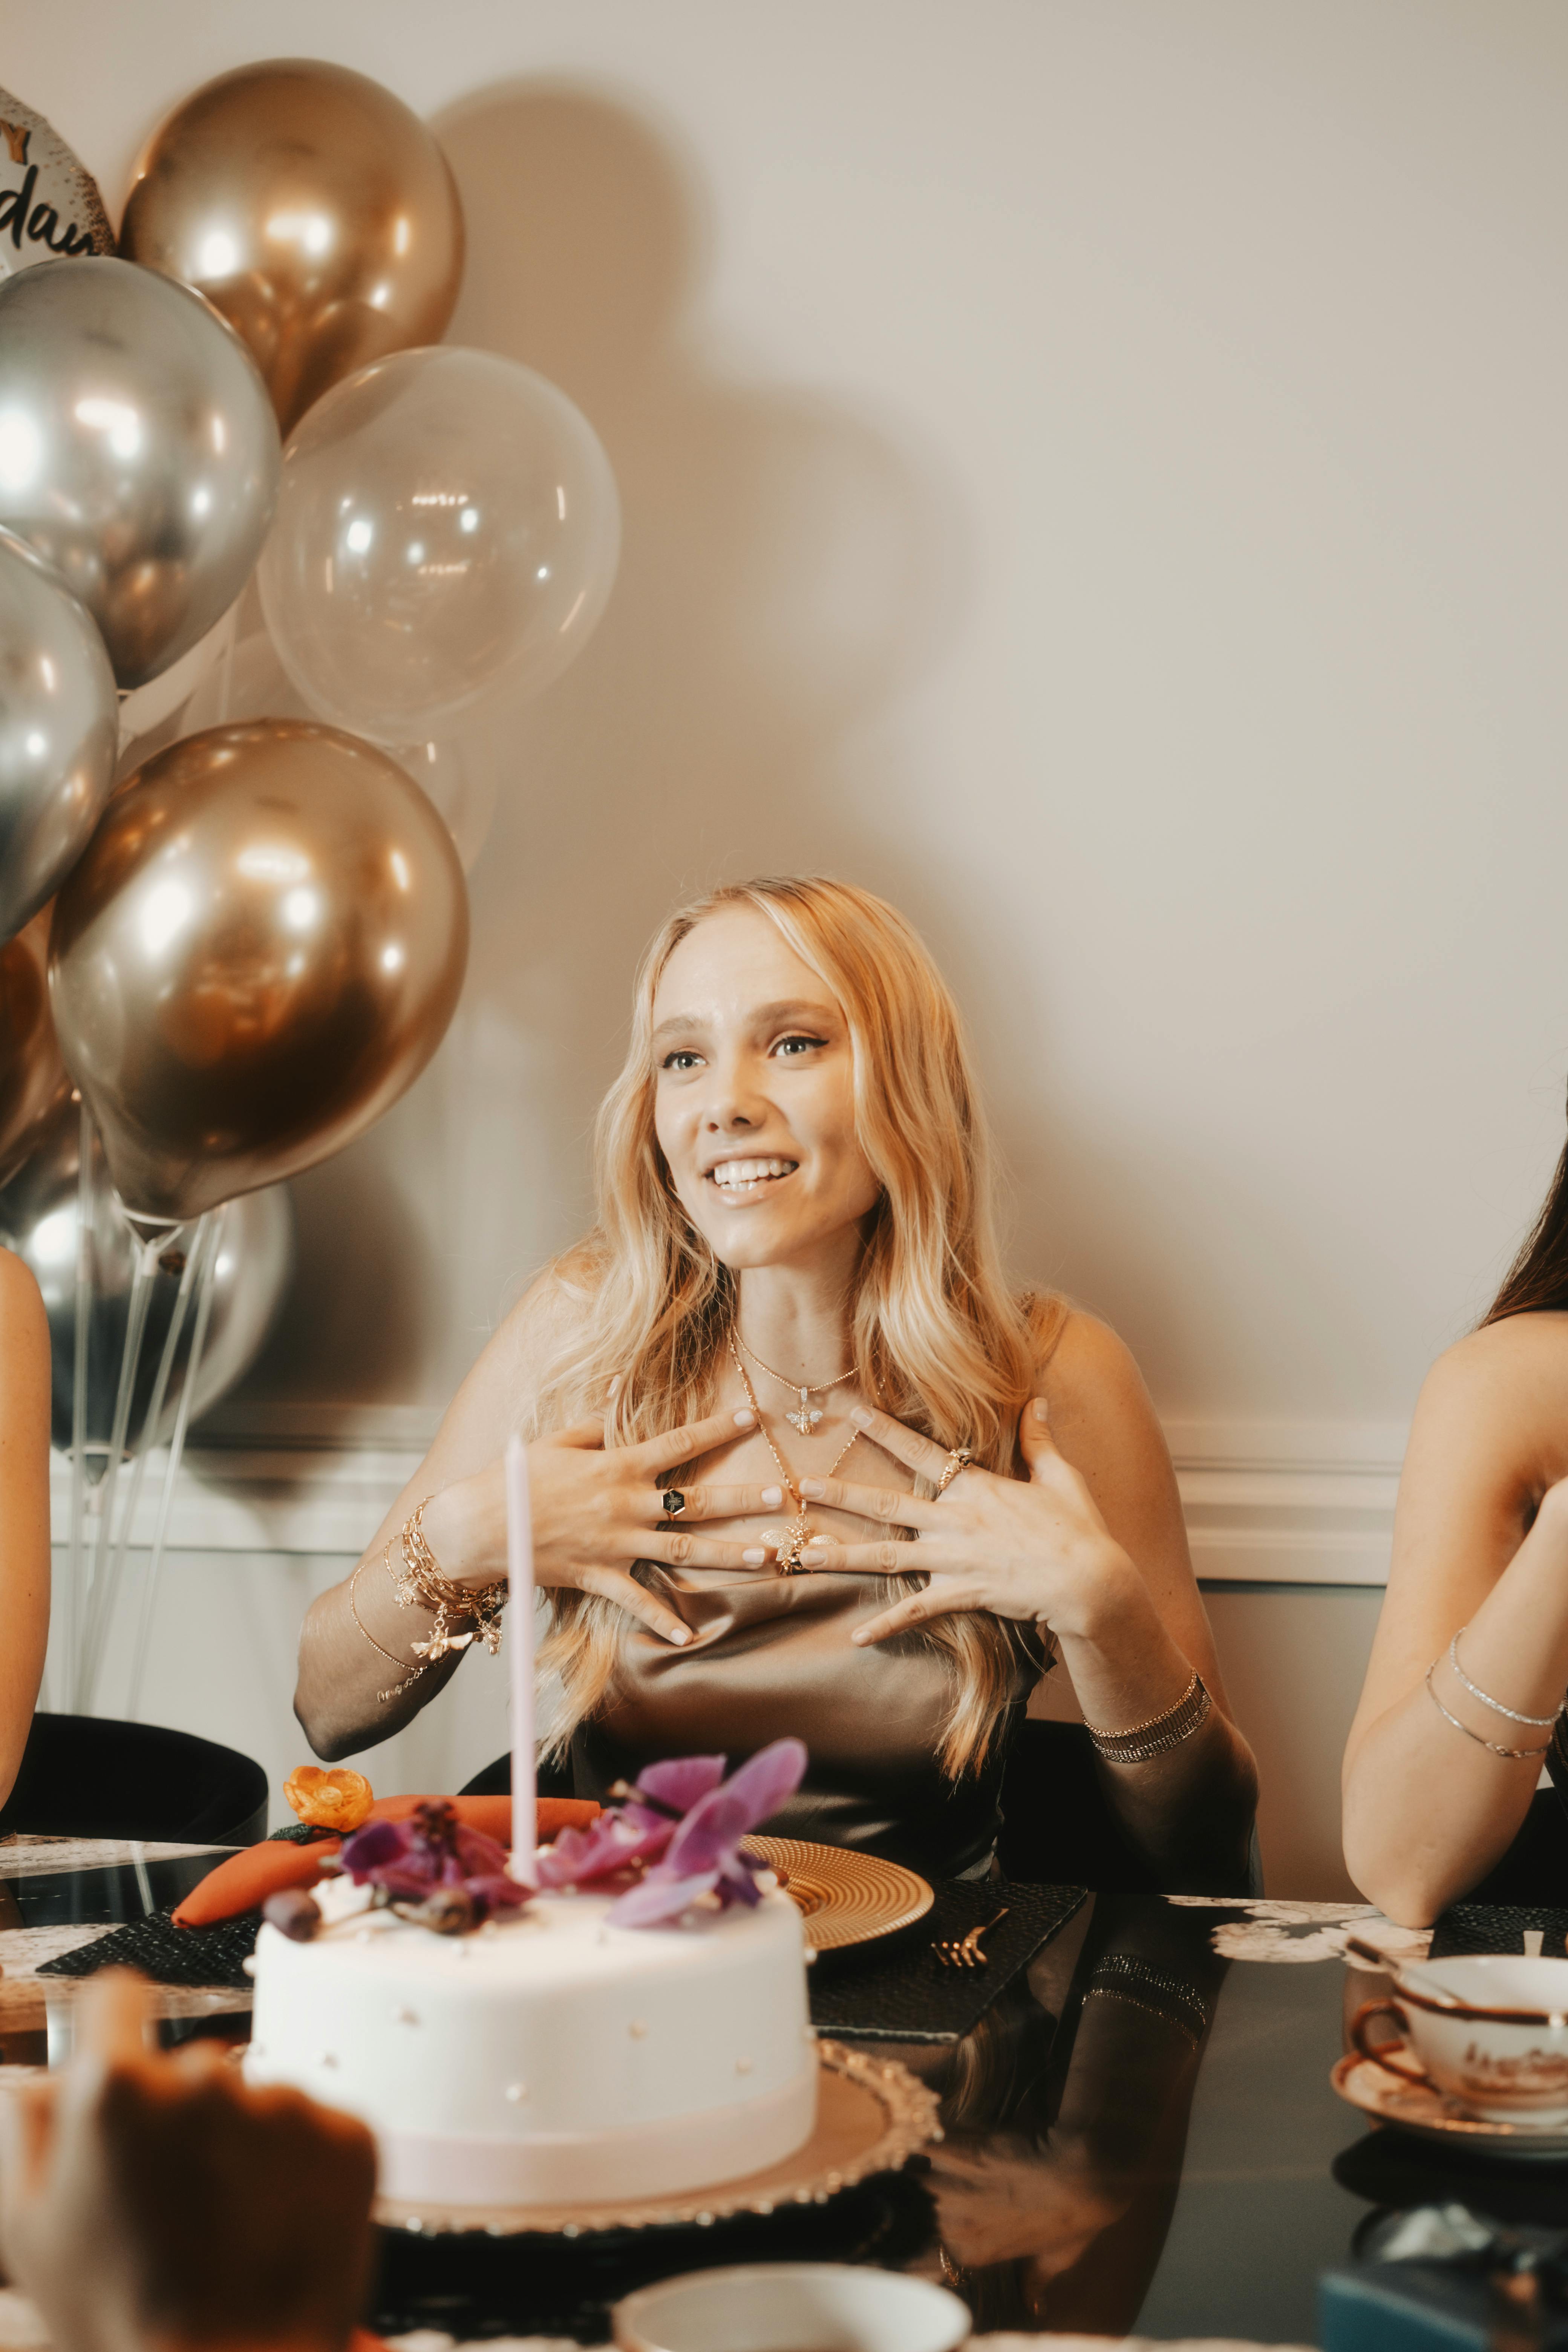 Woman With a Cake on a Birthday Party · Free Stock Photo